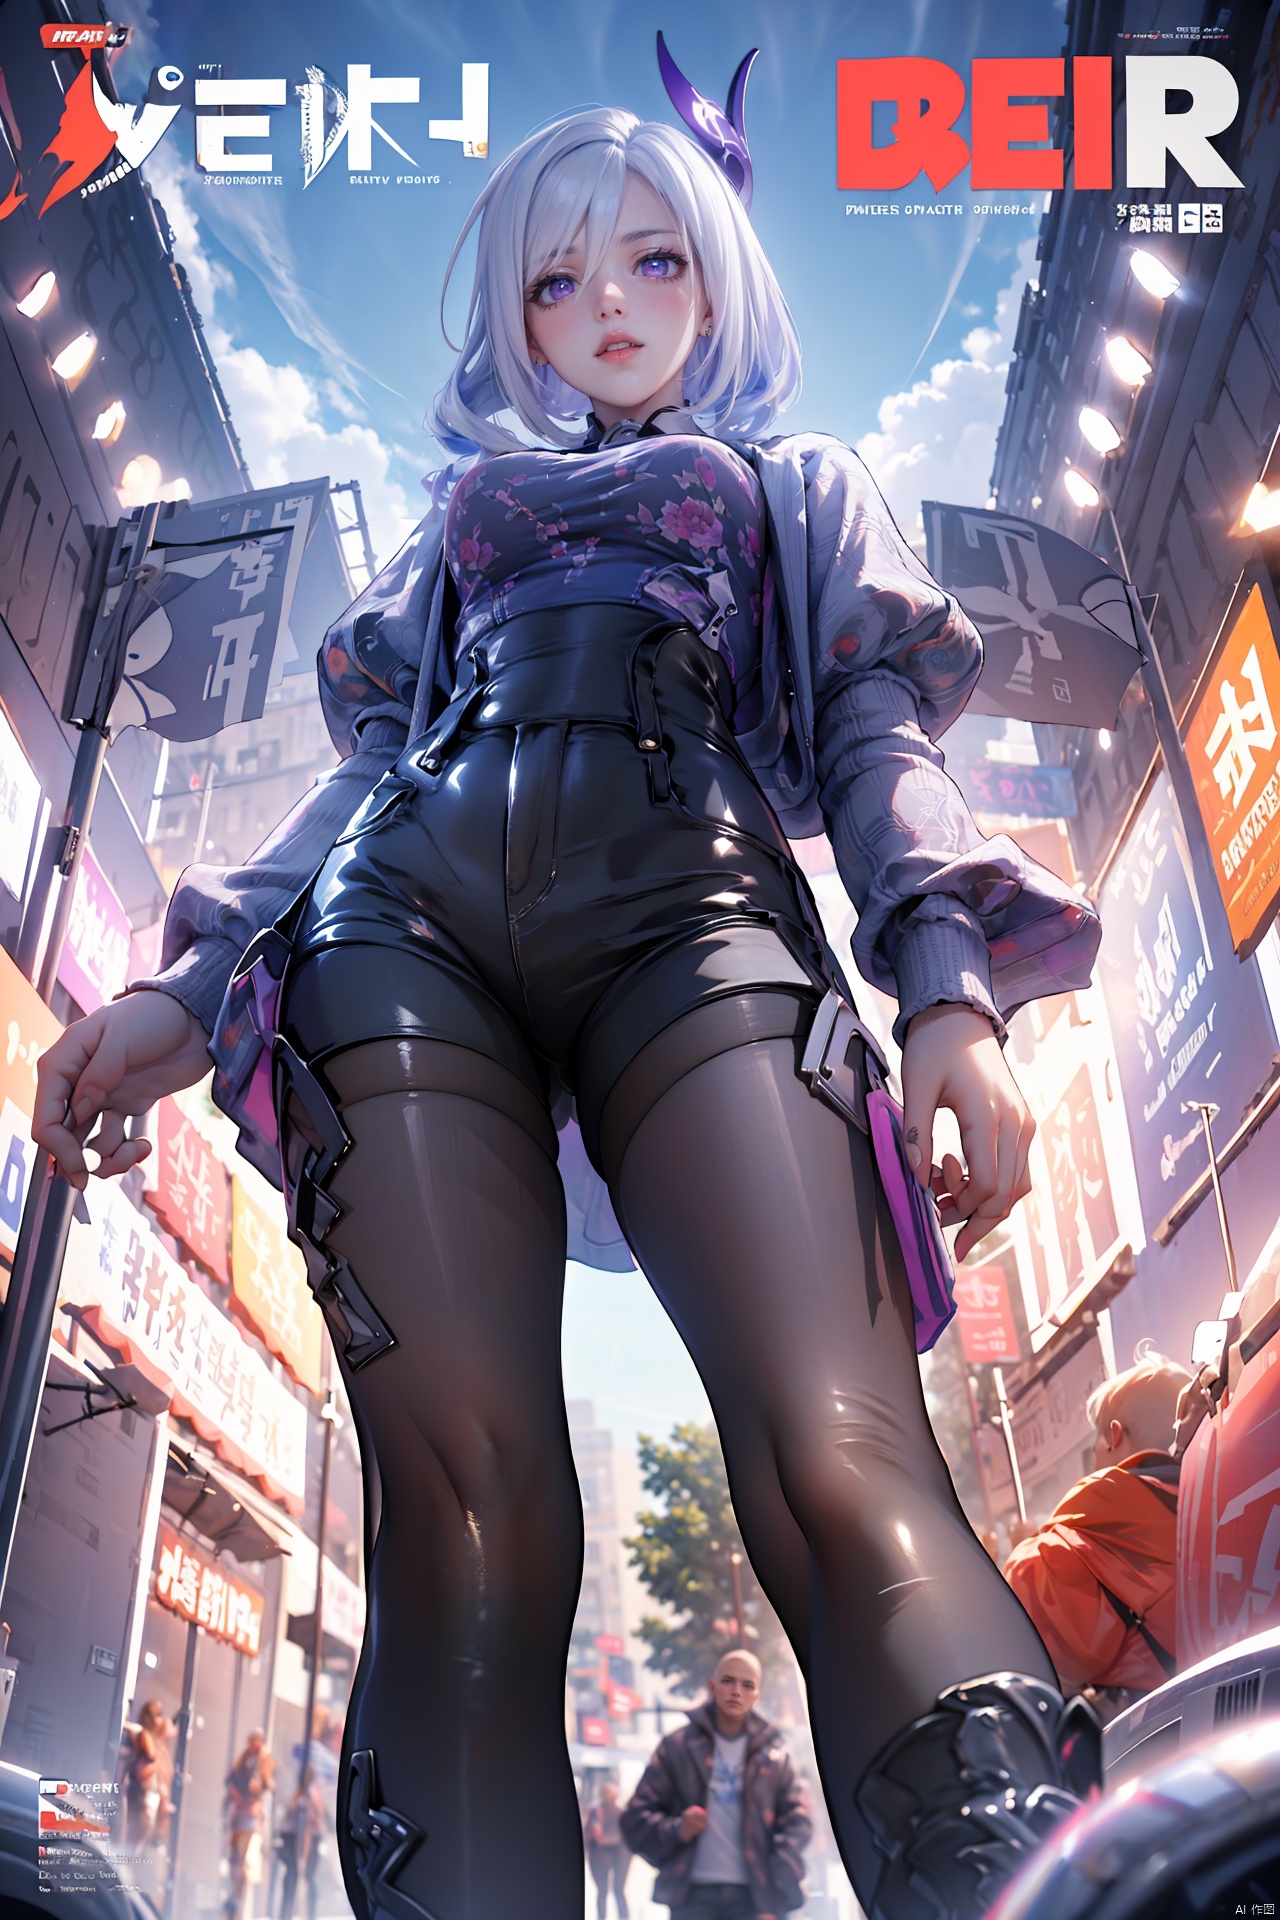  (best quality), (ultra detailed), ((masterpiece)), sfw,consored,illustration, ray tracing,contrapposto, female focus,model,
//////////////////////////
sexy, fine fabric emphasis,wall paper, crowds, fashion, Lipstick, depth of field, street, in public,(Magazine cover:1.2),(title),(Magazine cover-style illustration of a fashionable woman), posing in front of a colorful and dynamic background.  (The text on the cover should be bold and attention-grabbing, with the title of the magazine and a catchy headline)., yutu honkai3rd